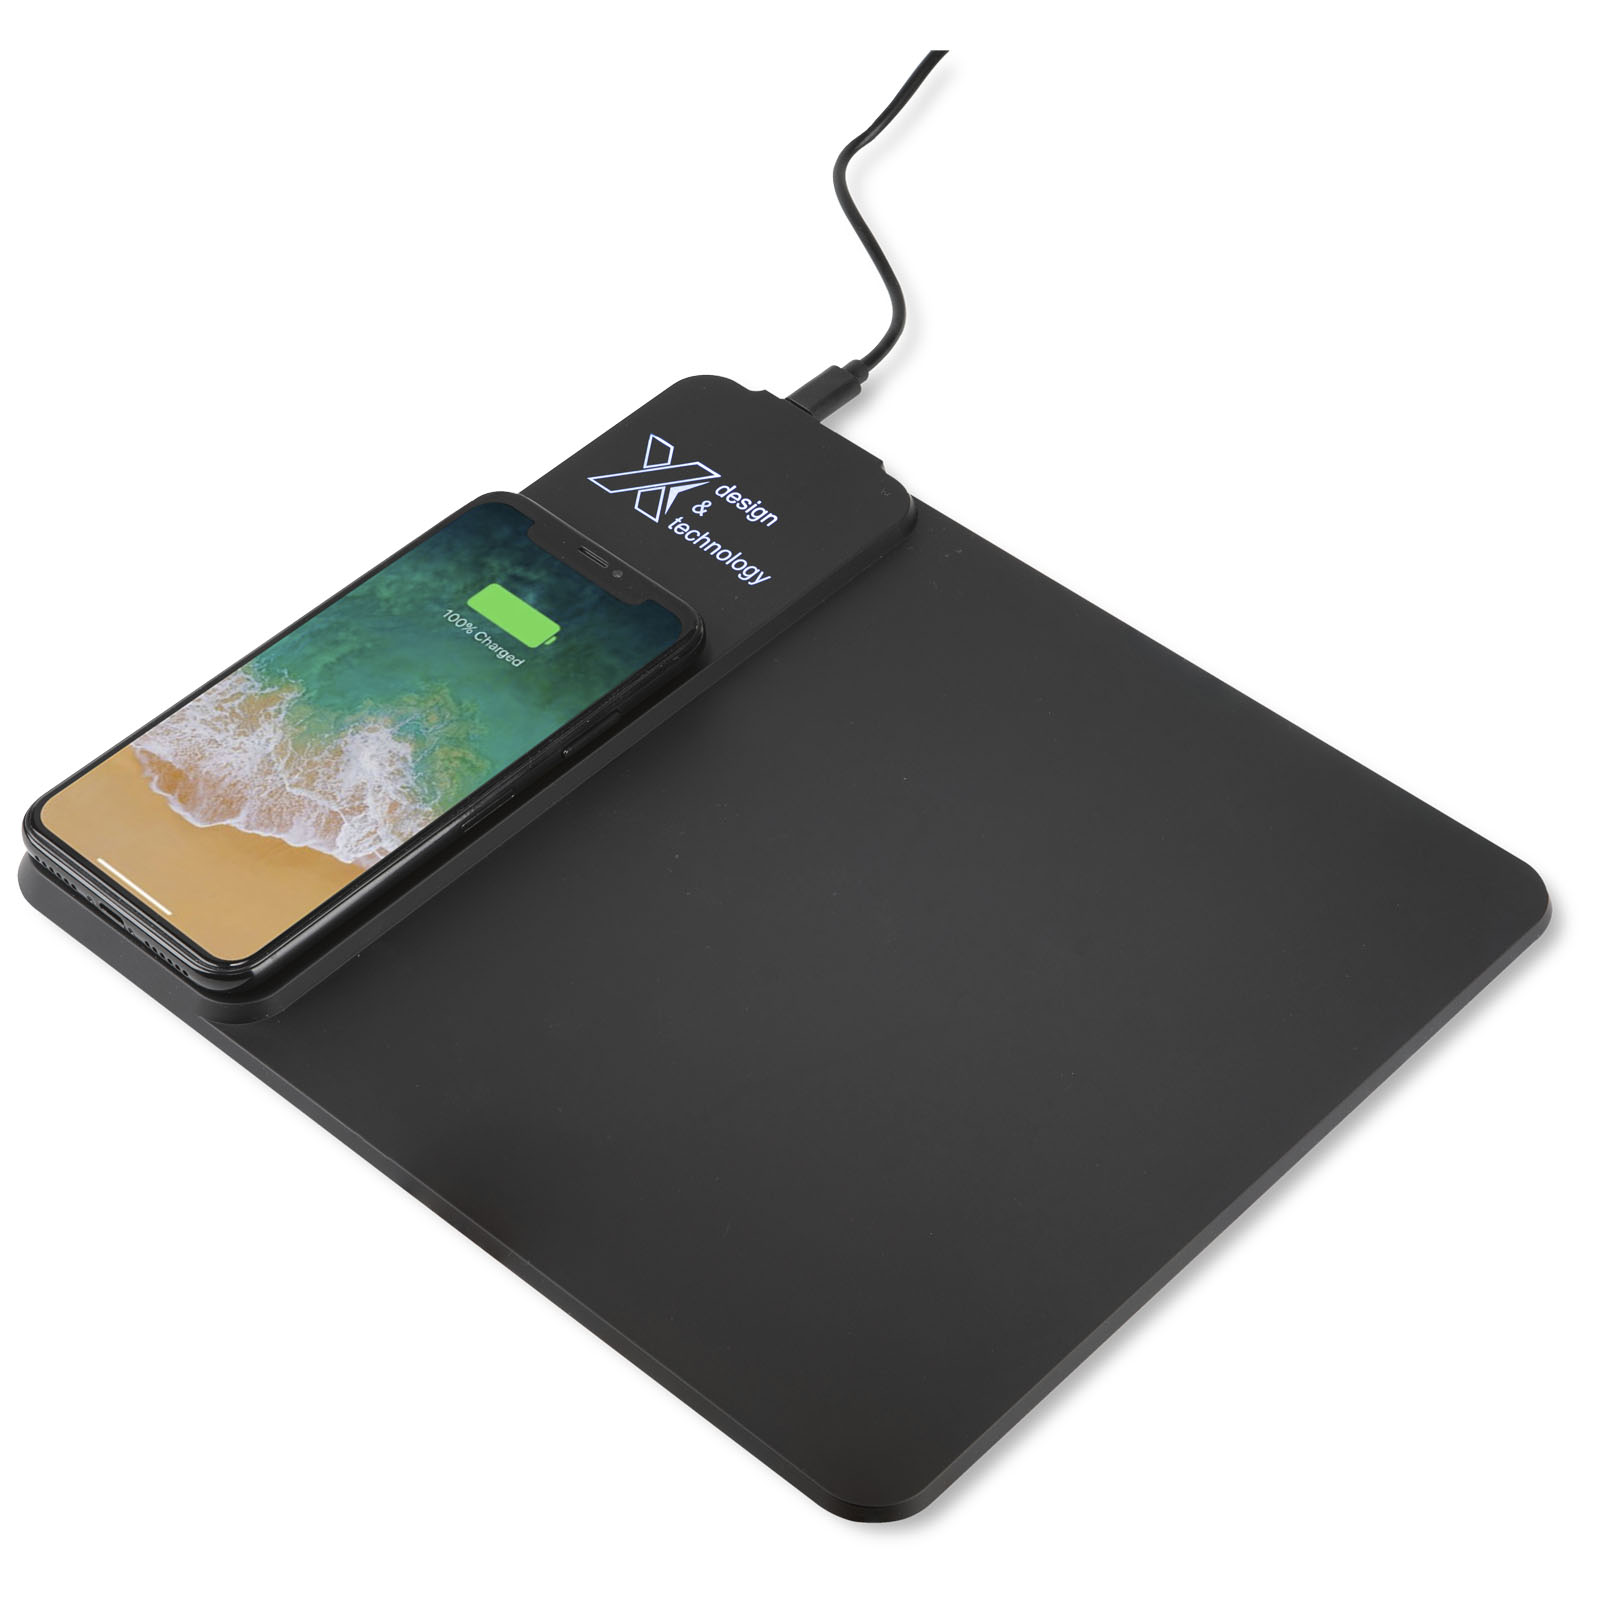 10W Wireless Charging Mouse Pad - Little Horsted - Whitchurch Canonicorum